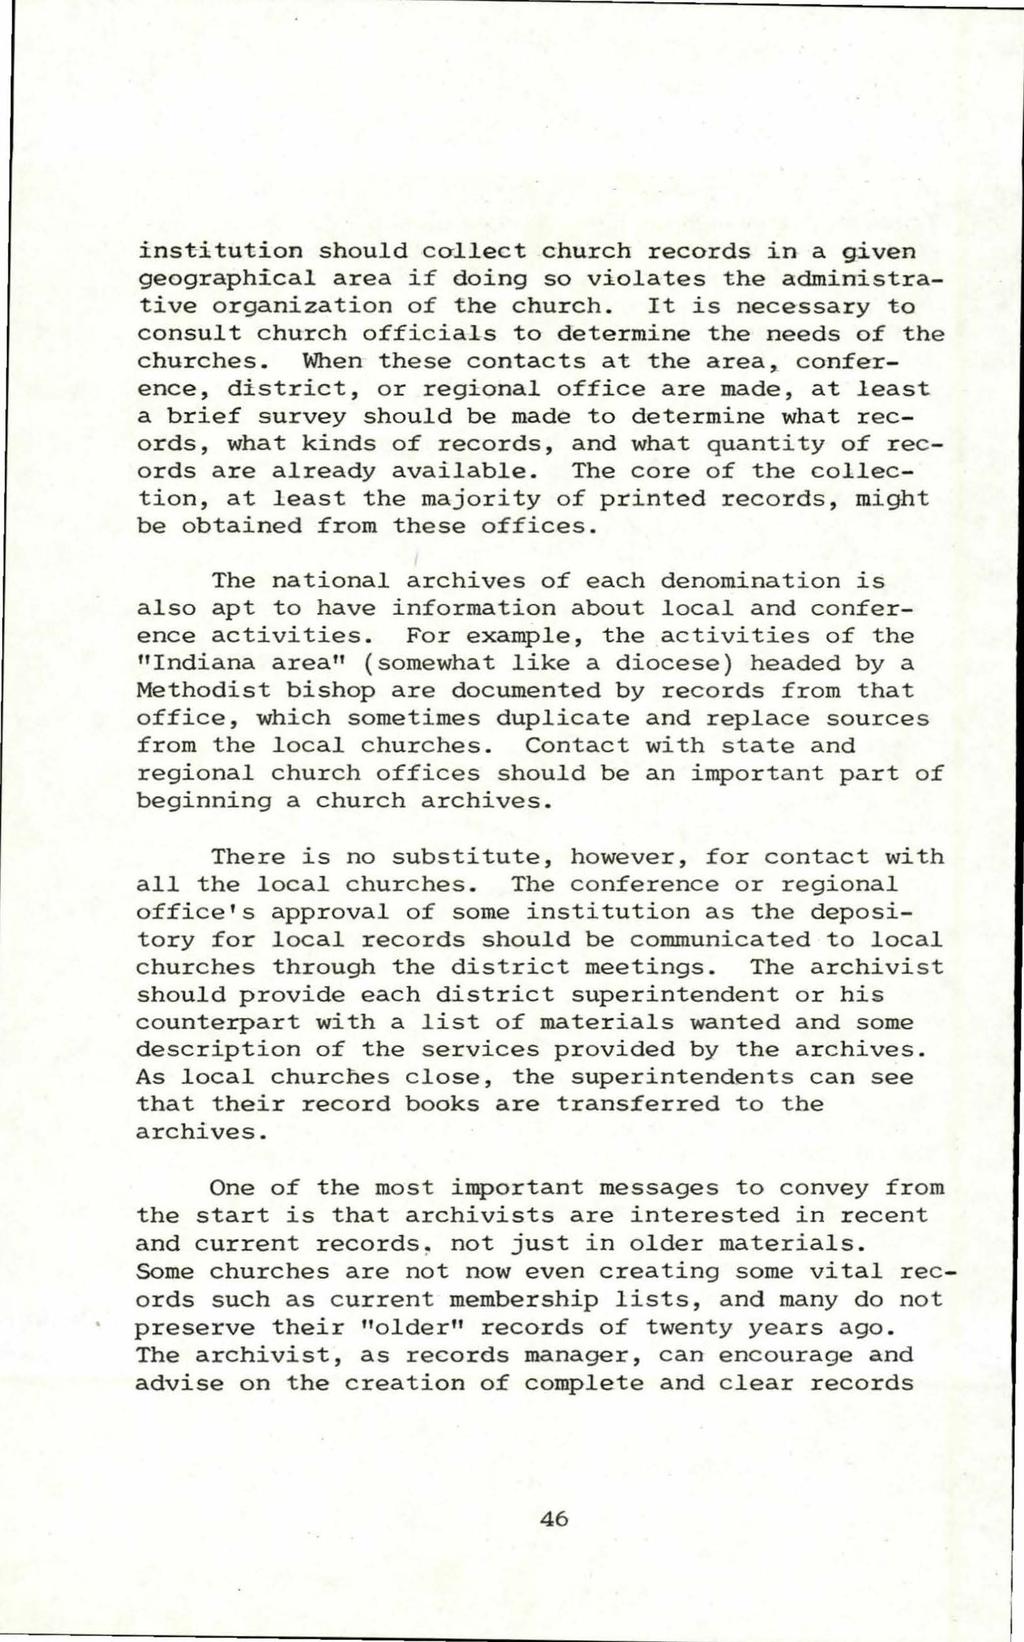 Georgia Archive, Vol. 8 [1980], No. 2, Art. 5 ±ns~itution should callect church records in a given geographical area i doing so violates the admin~strative organization 0 the church.